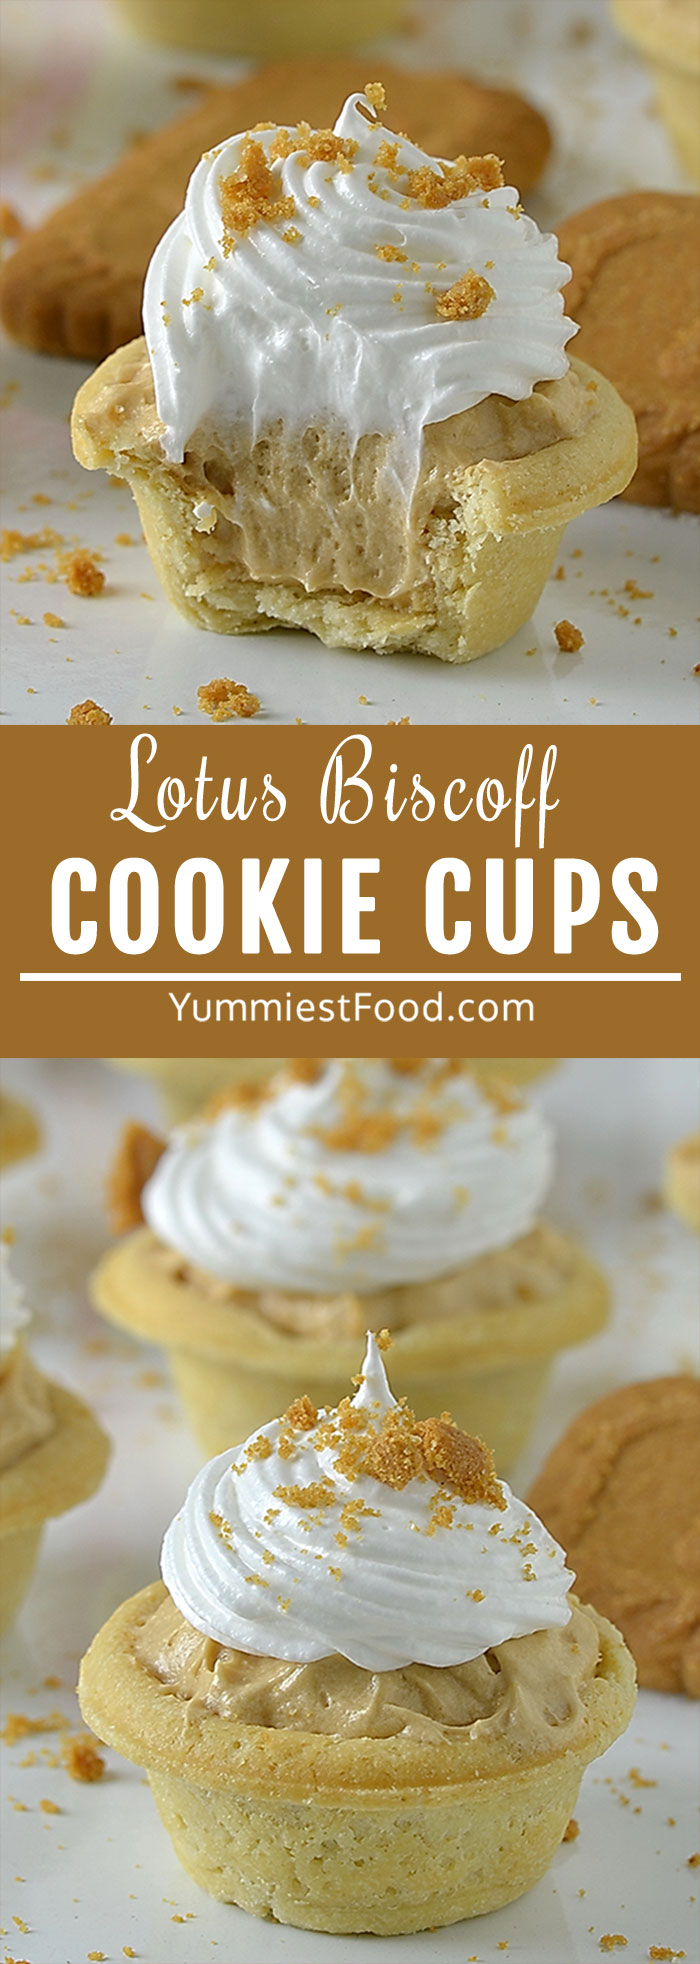 Lotus Biscoff Cheesecake Cookie Cups